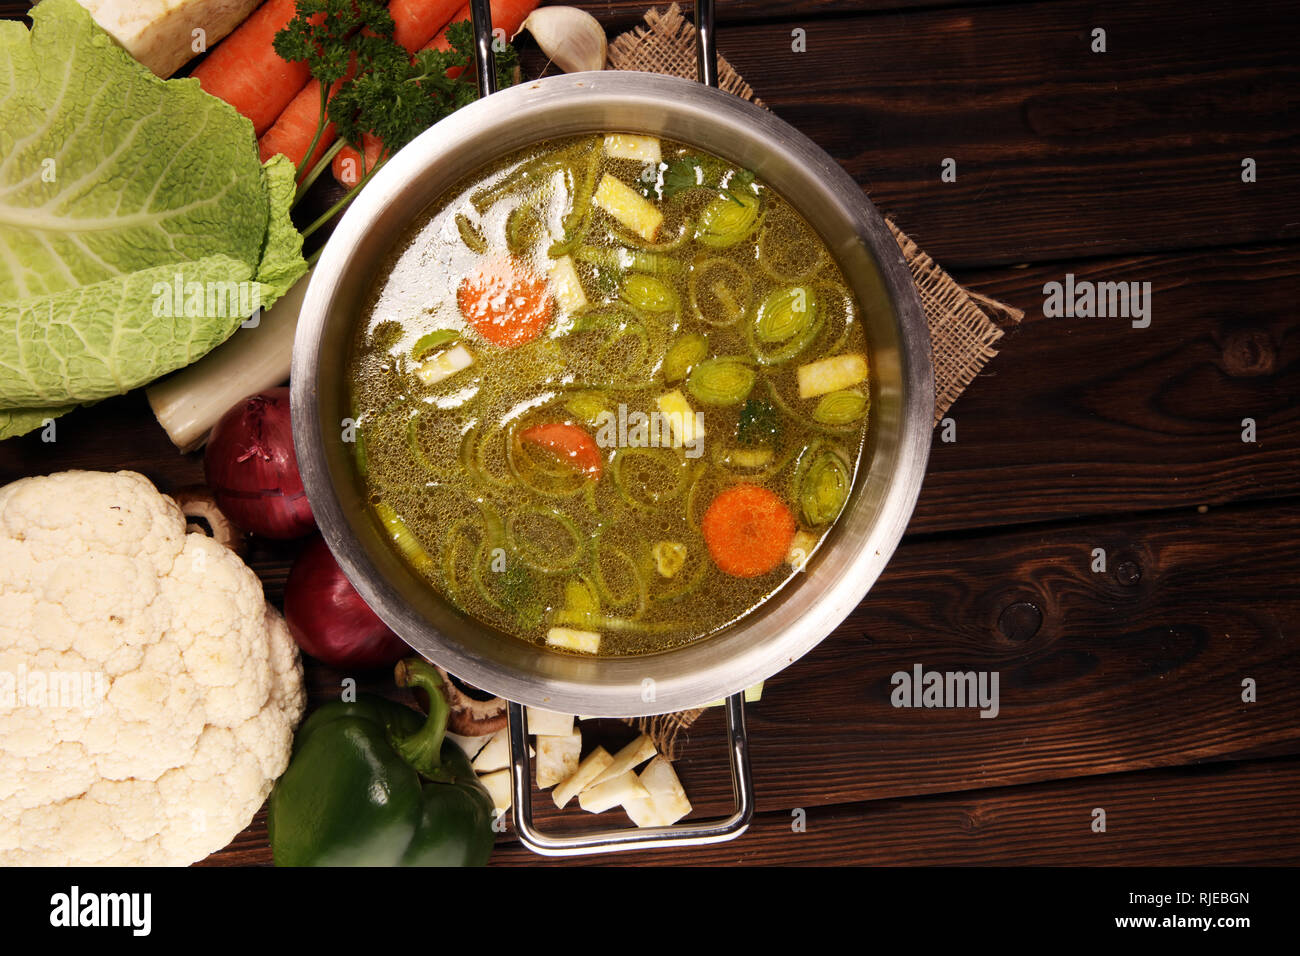 https://c8.alamy.com/comp/RJEBGN/broth-with-carrots-onions-various-fresh-vegetables-in-a-pot-colorful-fresh-clear-spring-soup-rural-kitchen-scenery-vegetarian-bouillon-RJEBGN.jpg